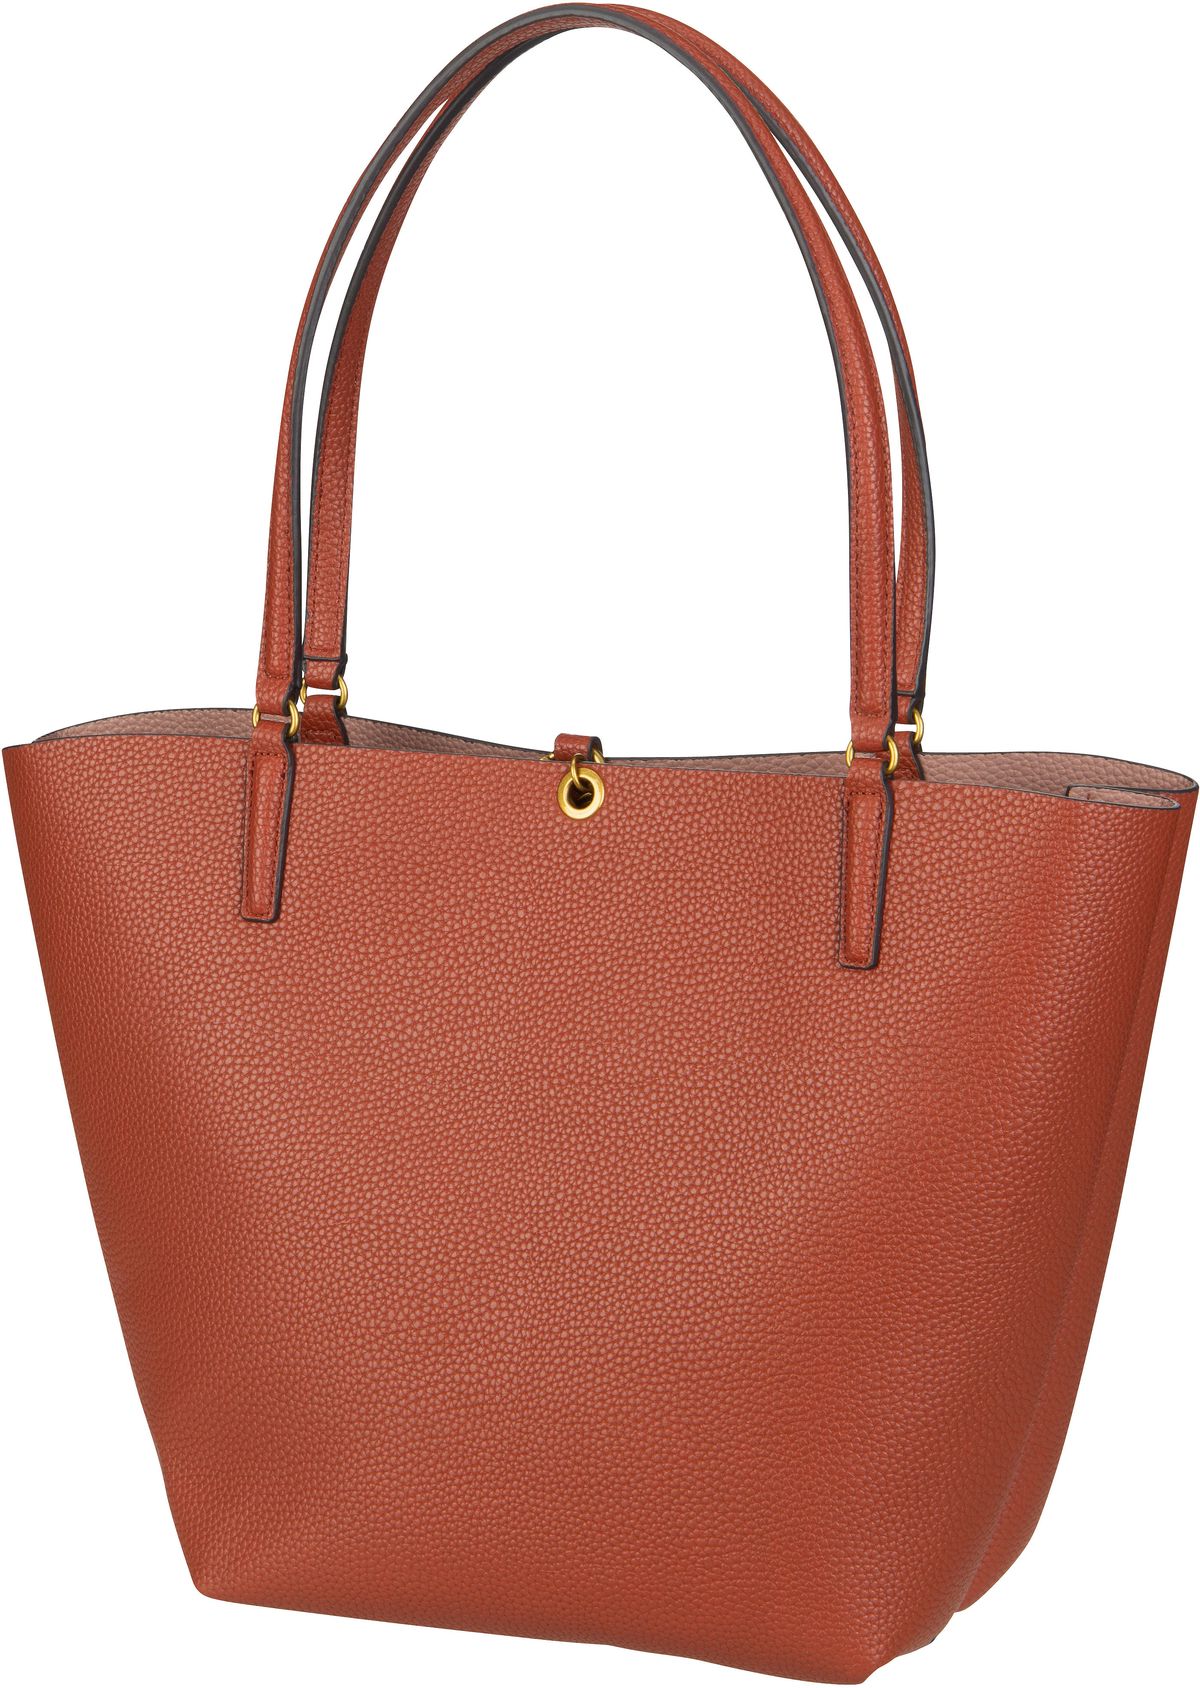 Guess Alby Toggle Tote - Whiskey/Rose